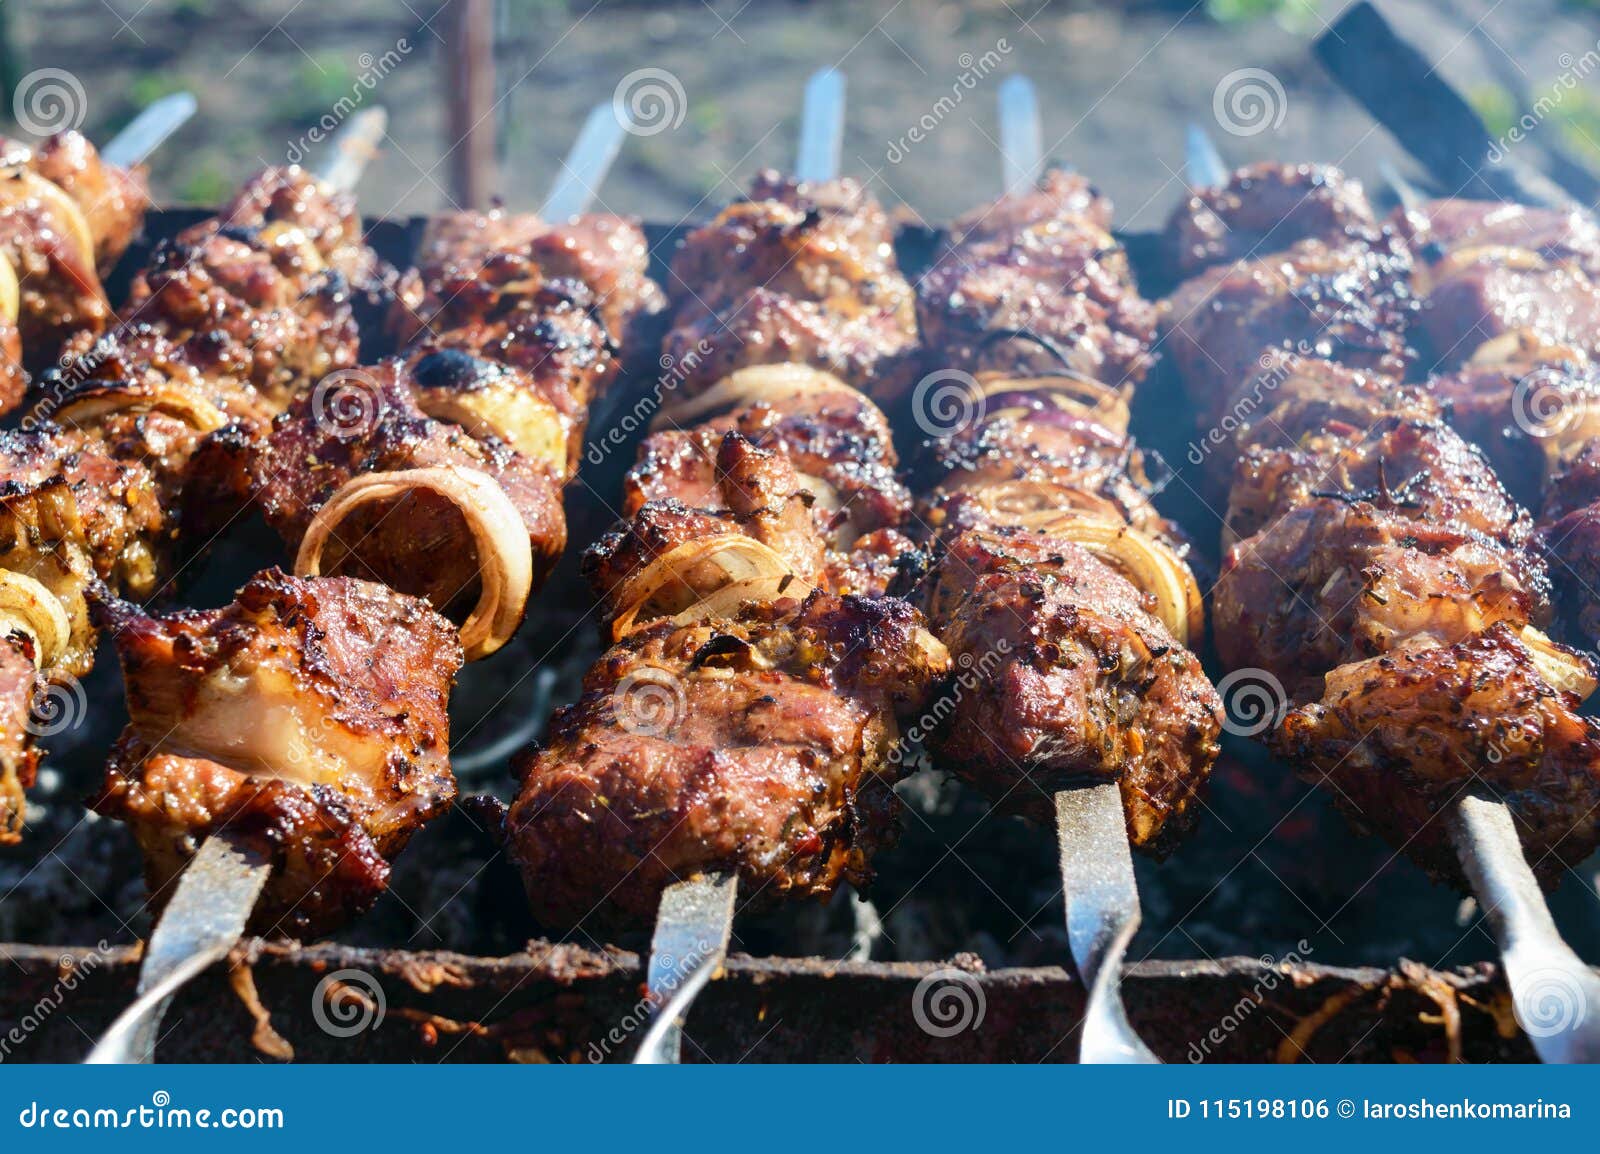 Meat on Iron Skewers, Cooked on an Open Fire. Shish Kebab Roasted ...